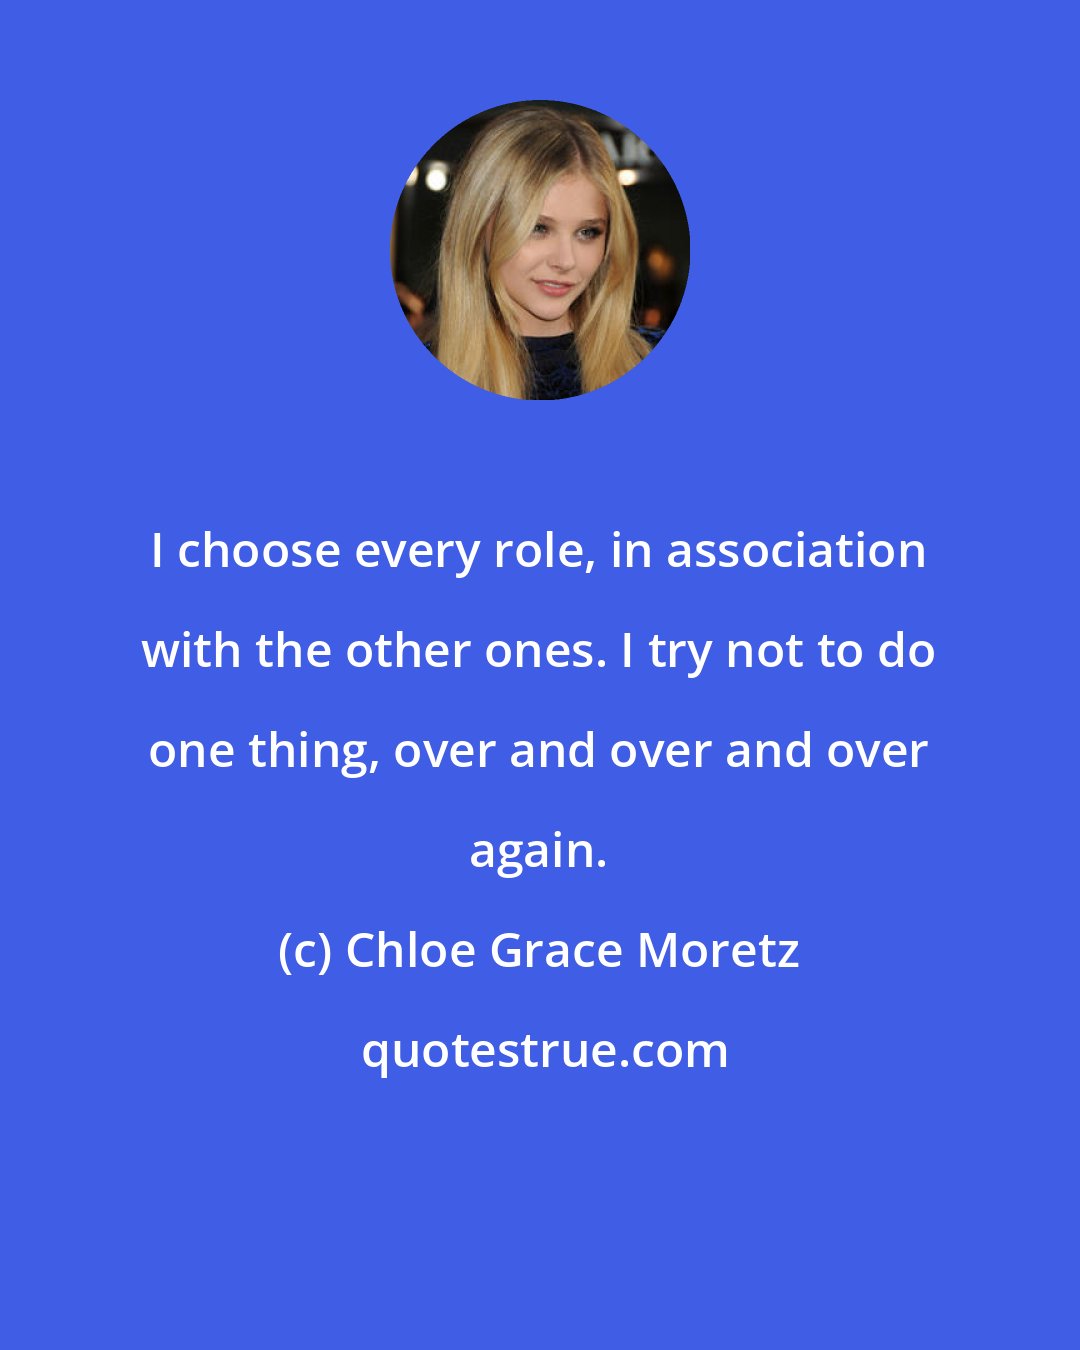 Chloe Grace Moretz: I choose every role, in association with the other ones. I try not to do one thing, over and over and over again.